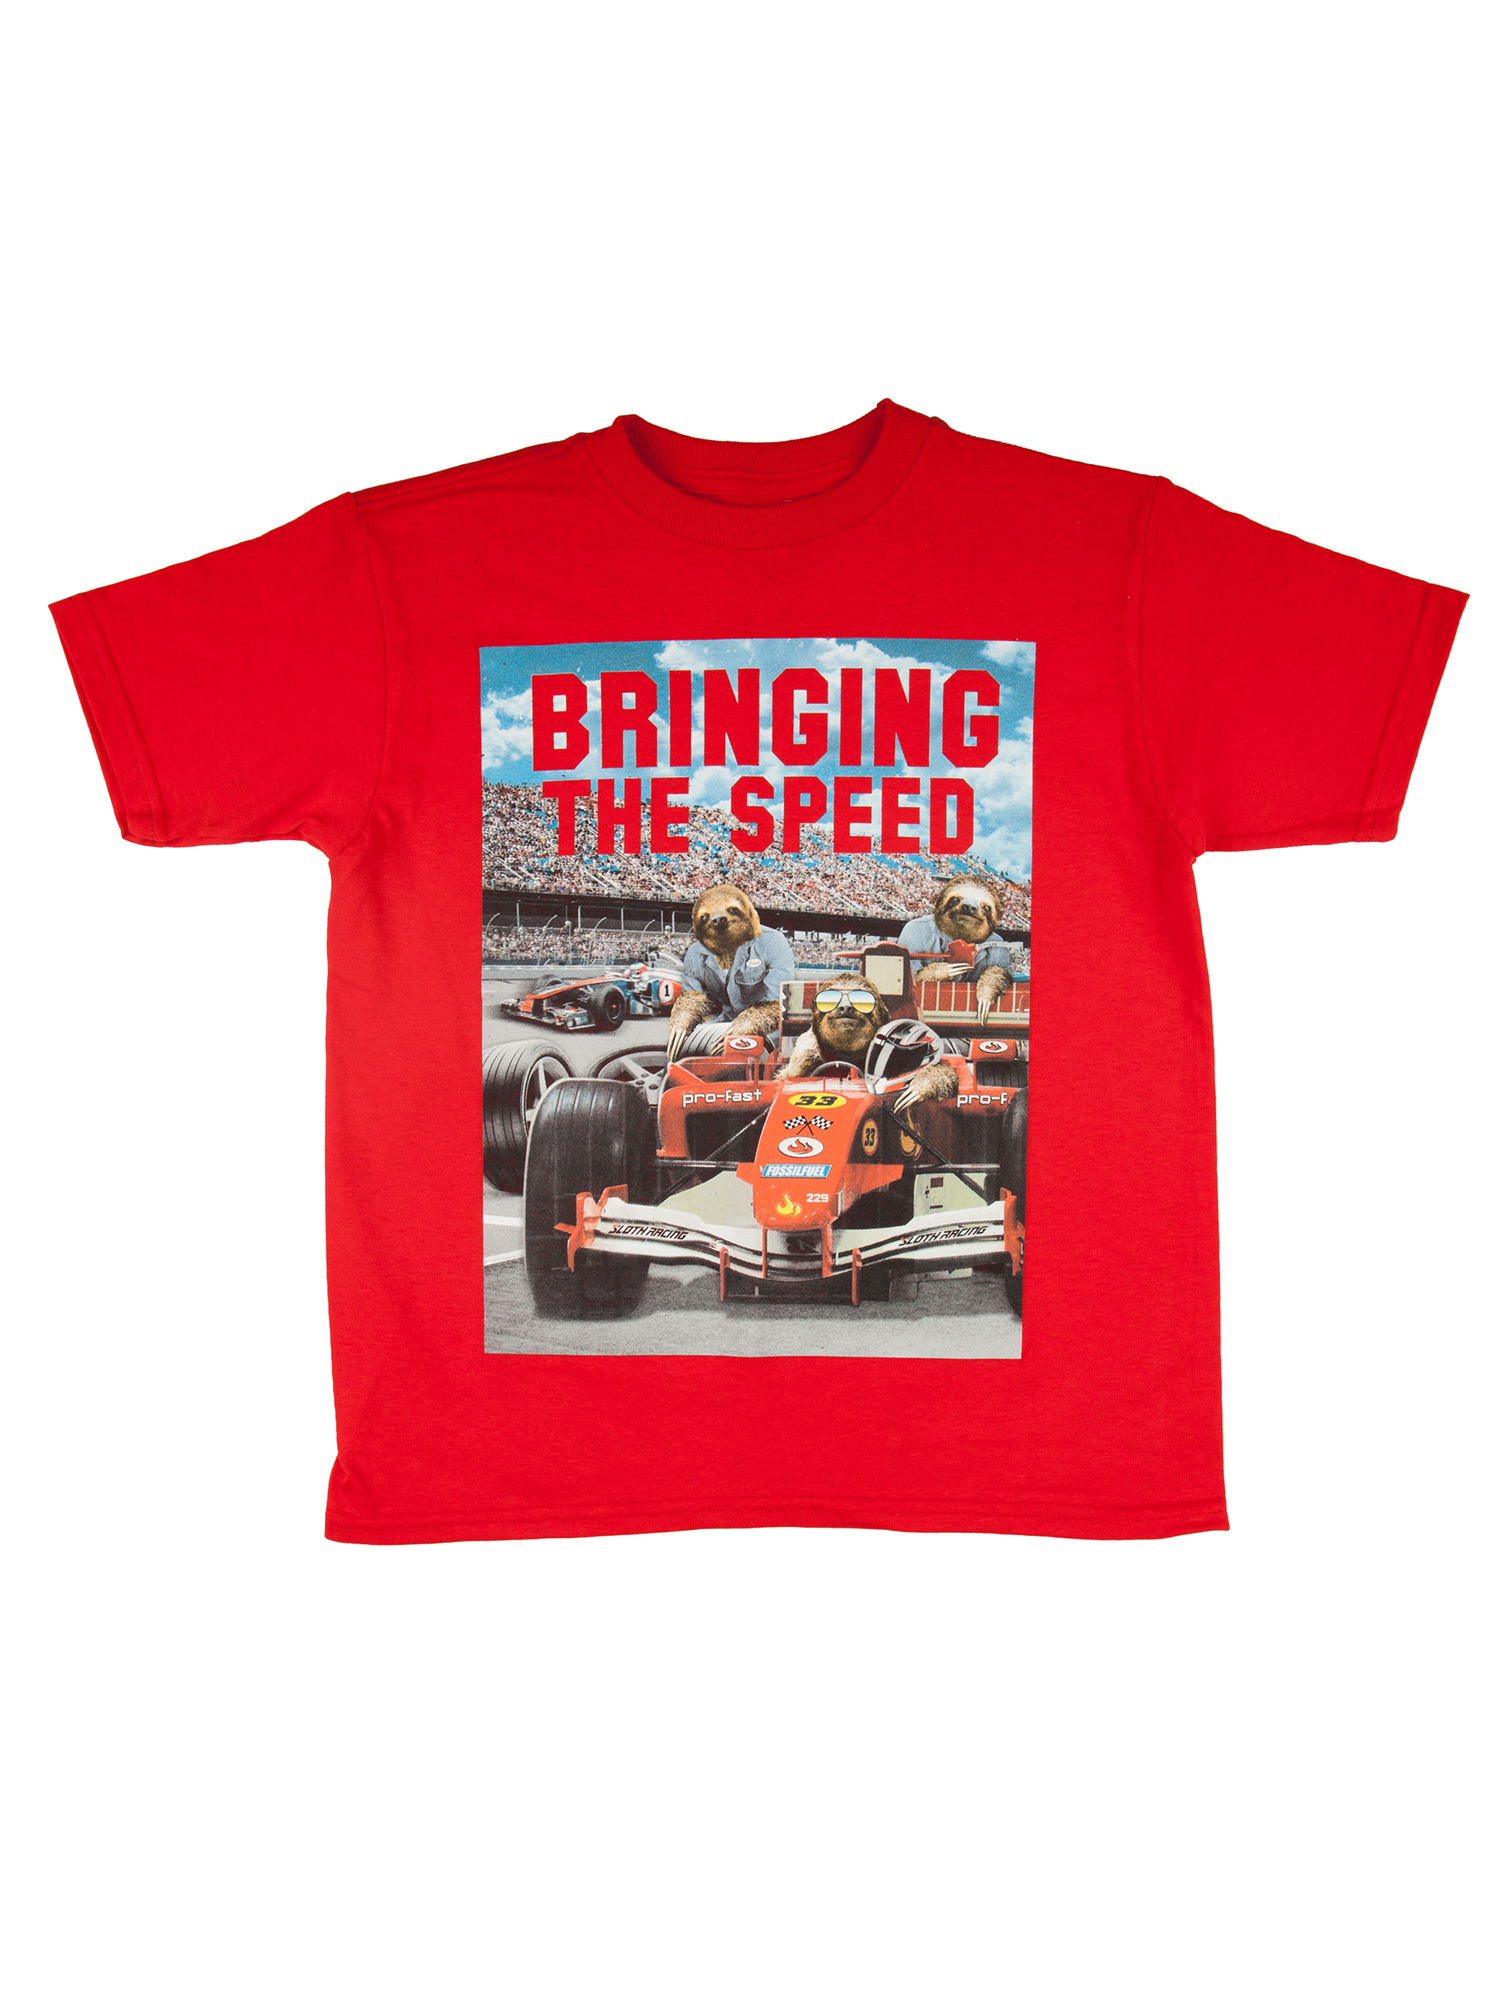 Bioworld "Bringing On The Speed" Red Short Sleeve Graphic T-Shirt Including Camo Truck Toy Gift With Purchase (Little Boys & Big Boys) - image 3 of 4